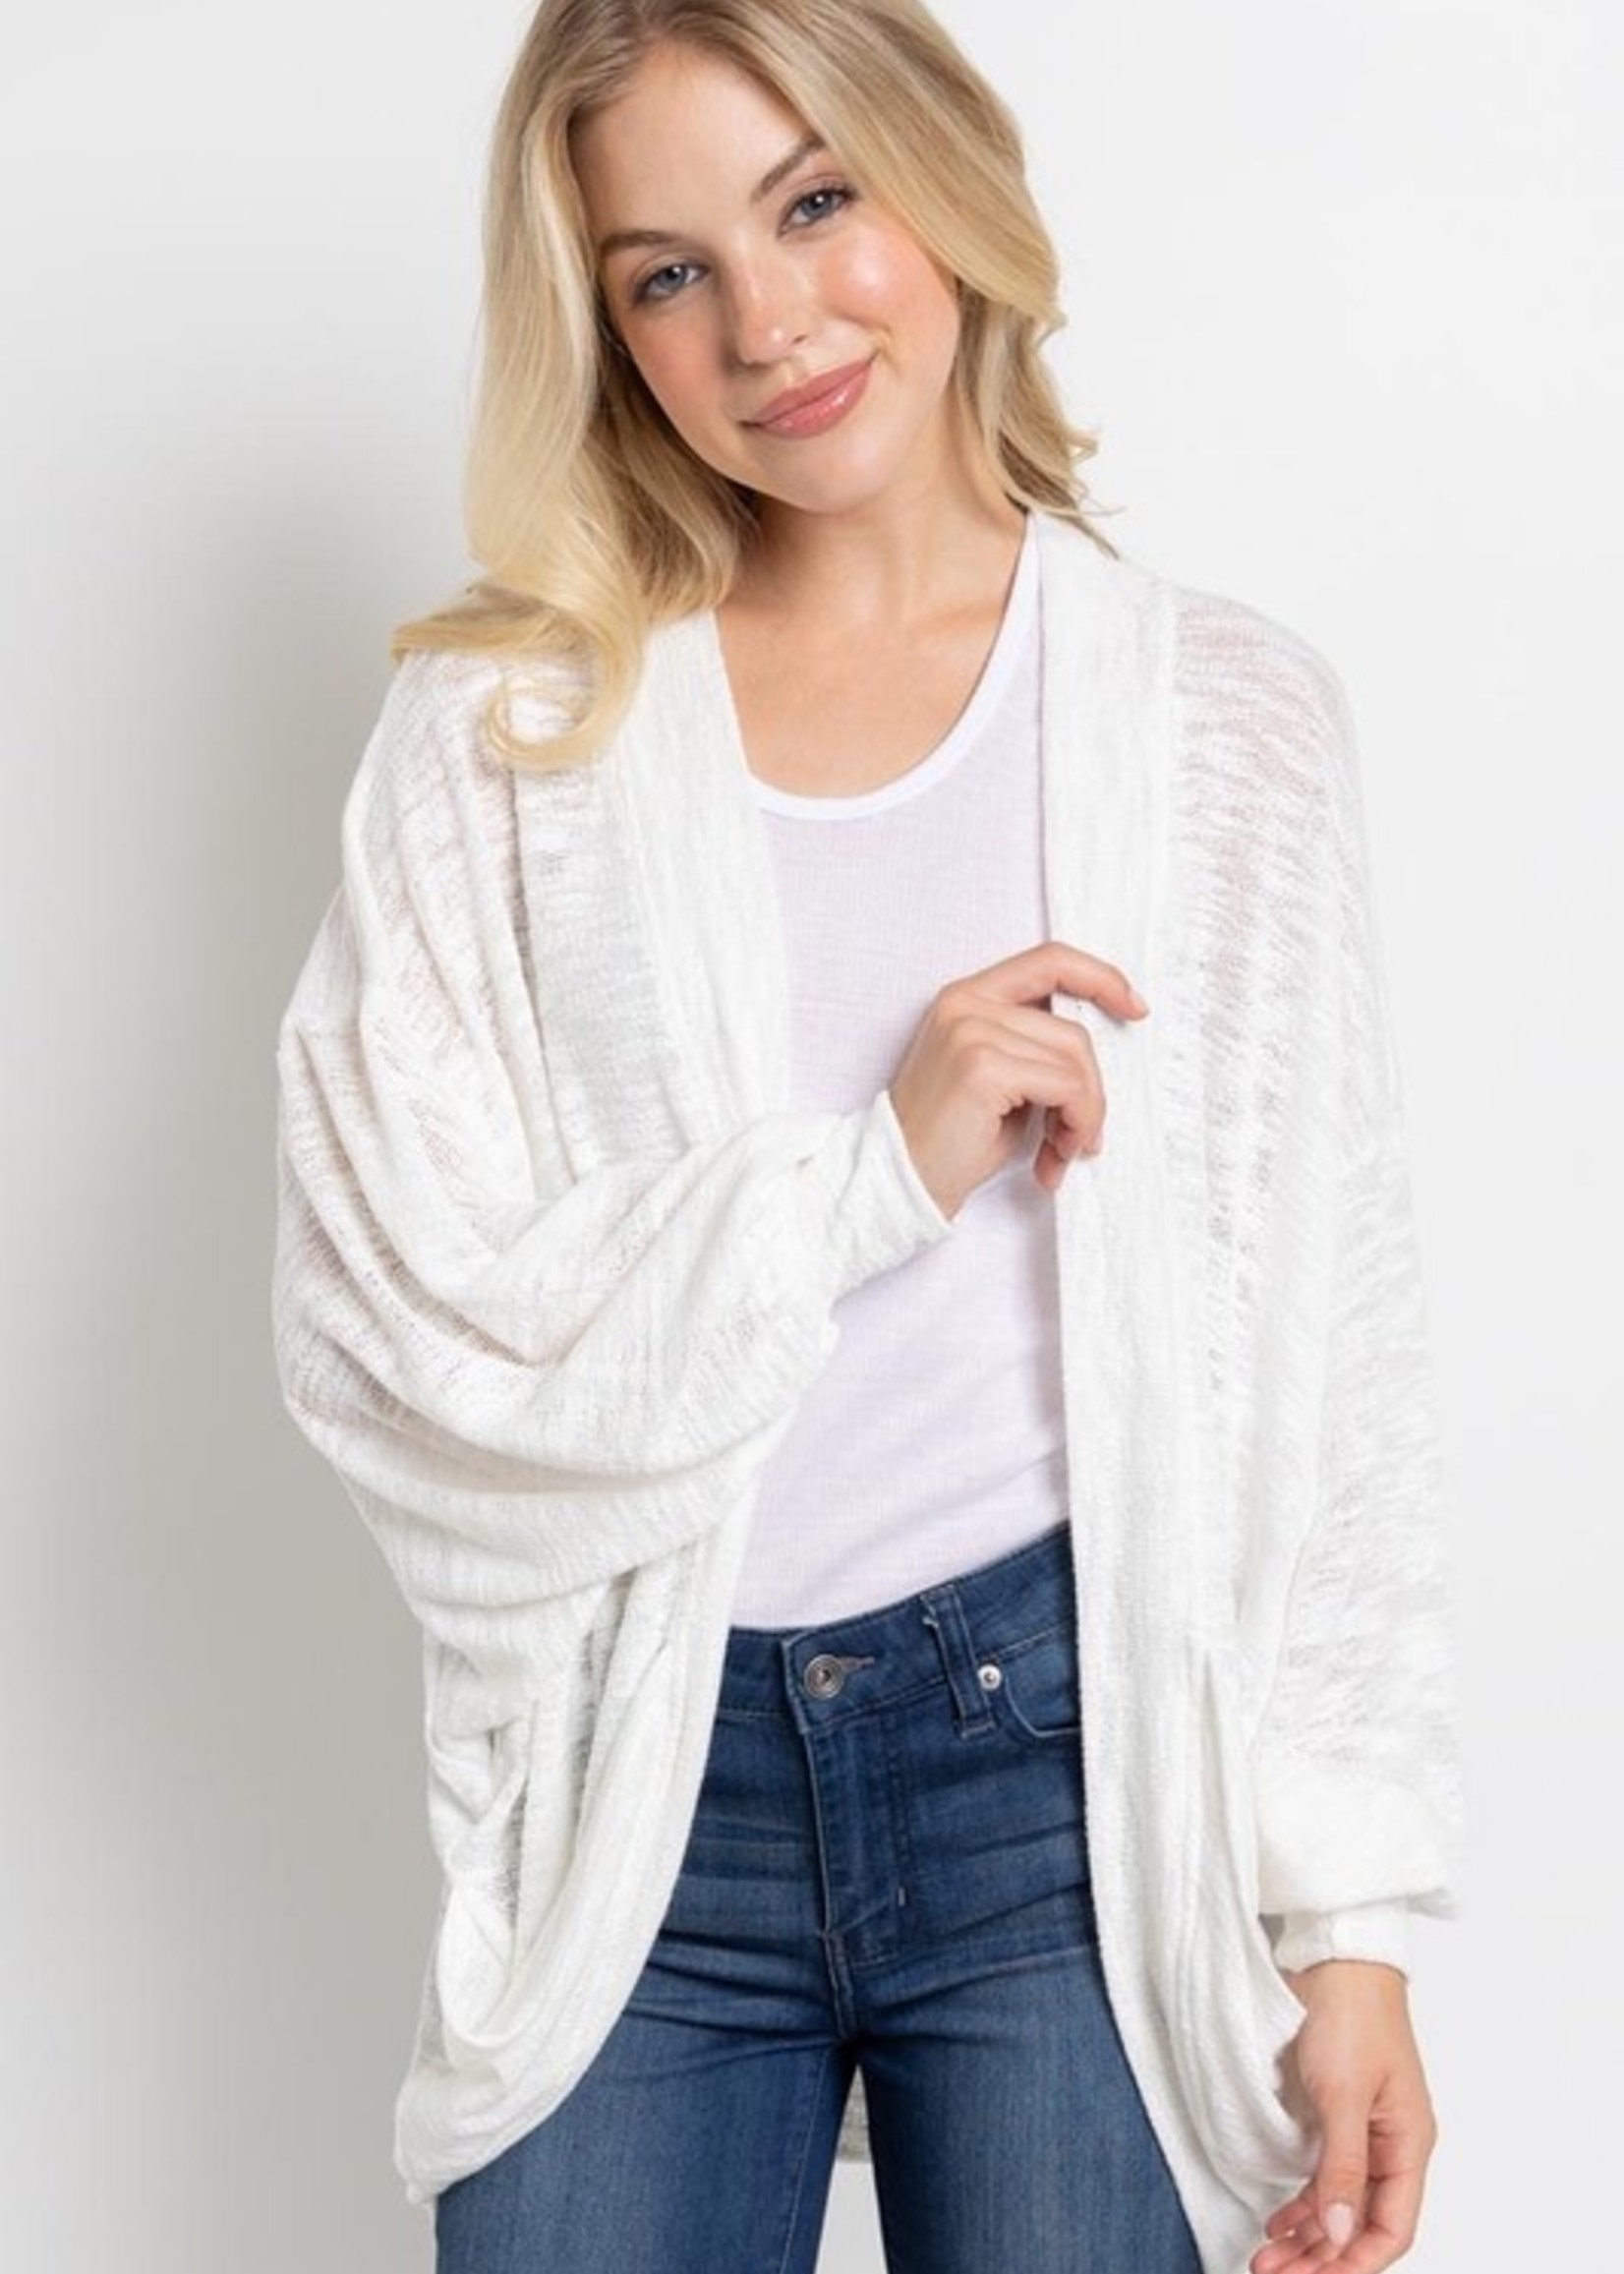 Clothing & Shoes - Tops - Sweaters & Cardigans - Cardigans - Rhonda Shear  Retreat Cocoon Cardigan - Online Shopping for Canadians